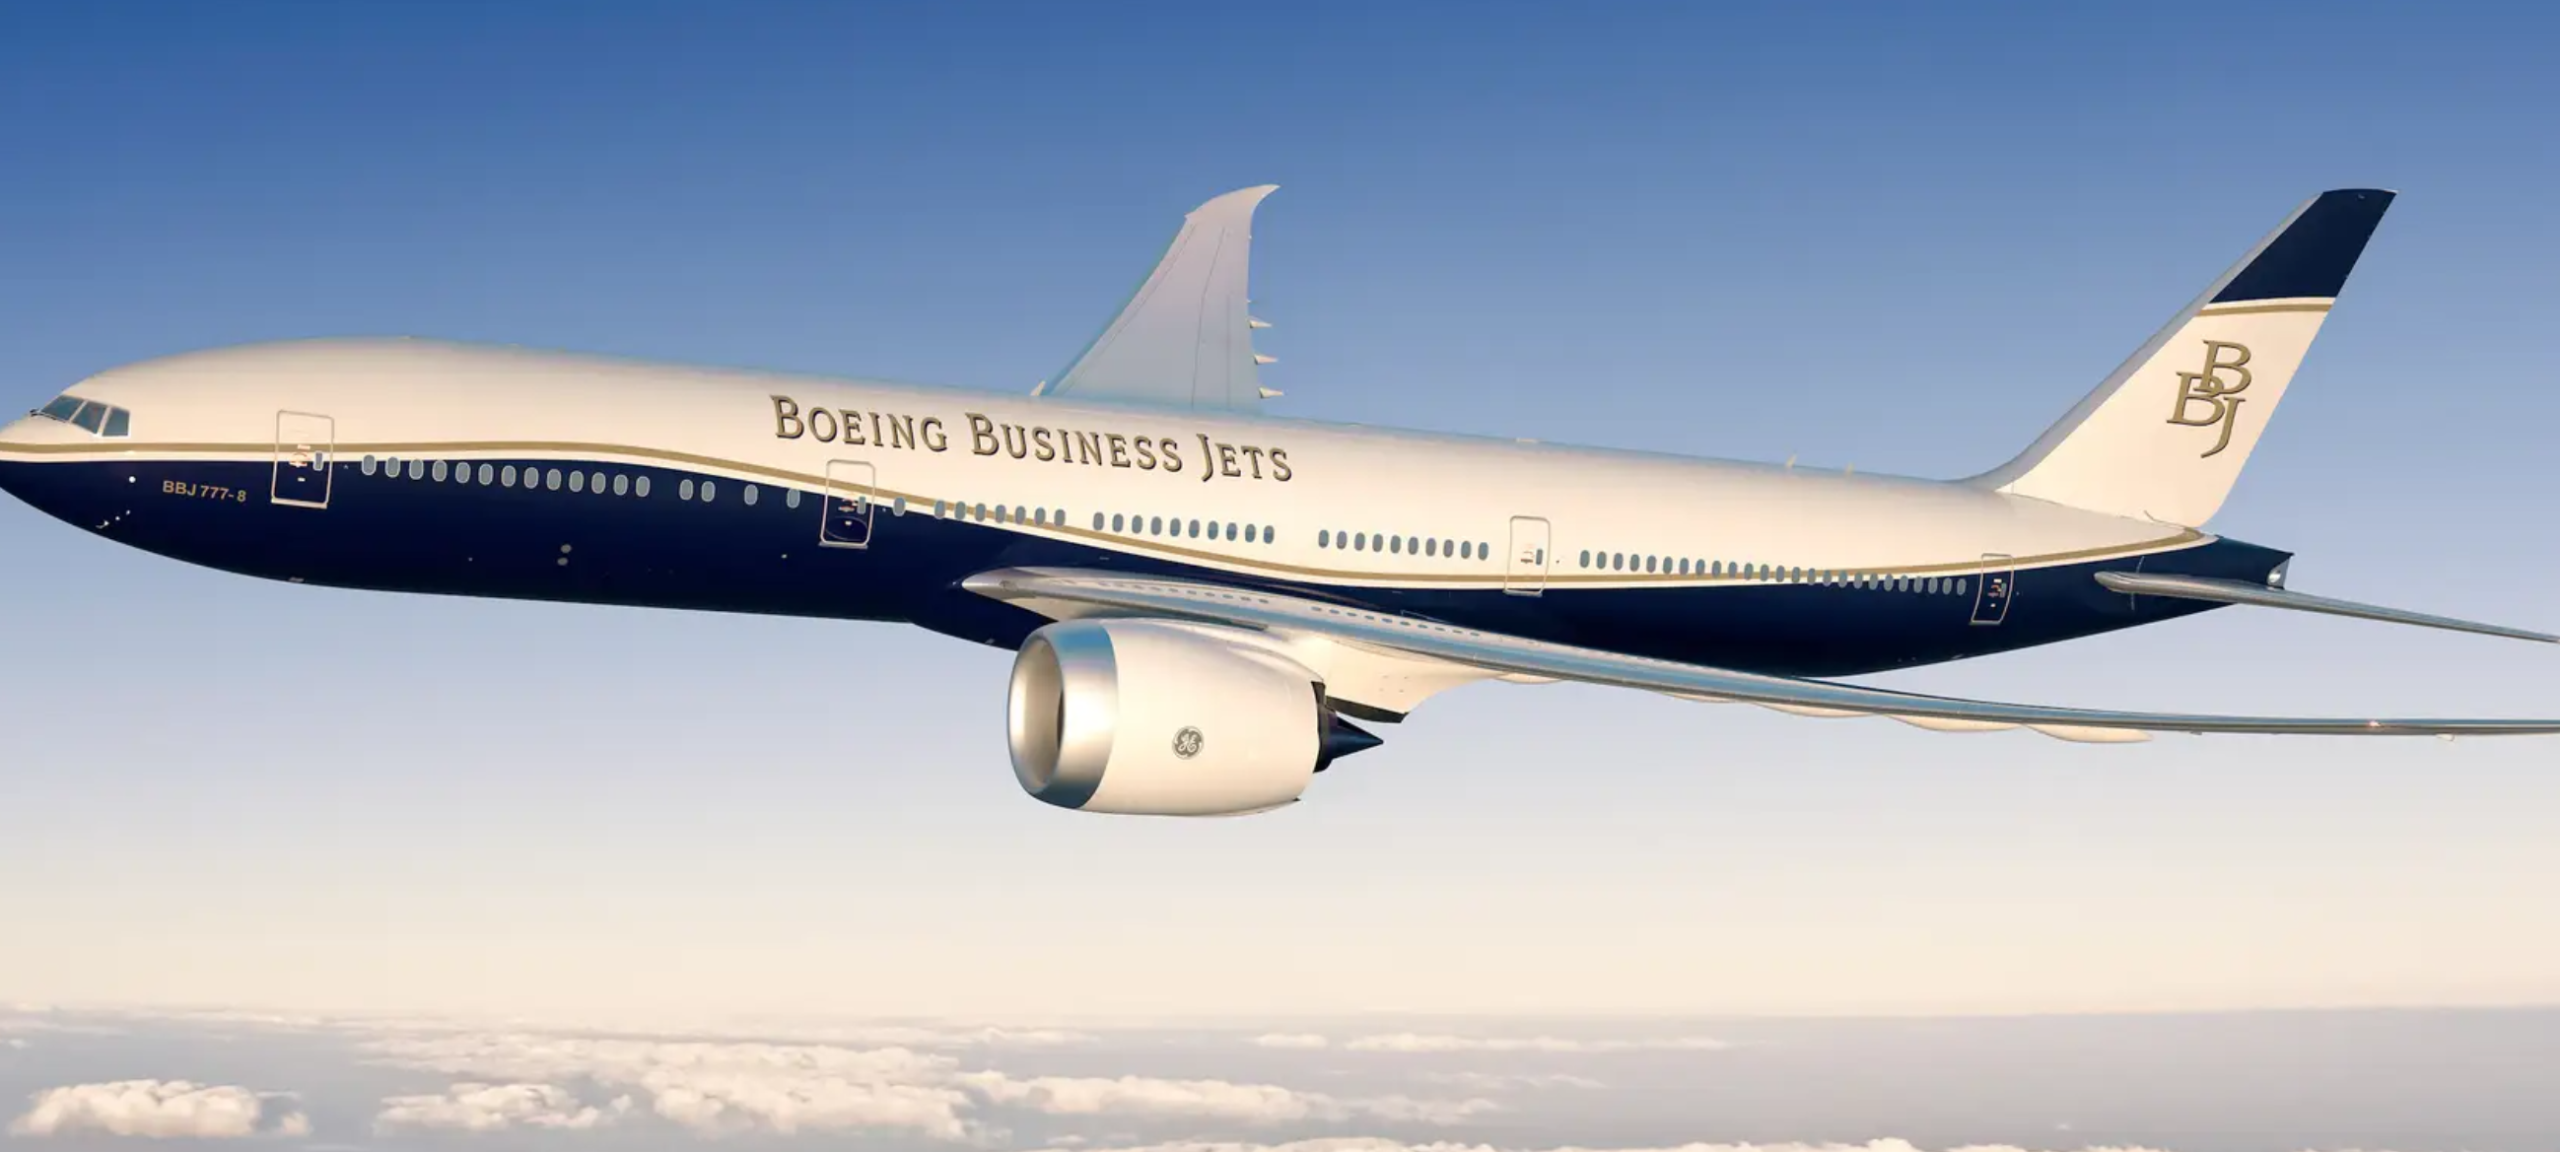 How Much Does Plane Cost - Price of Nine Private Airplanes, Including the Boeing Business Jet